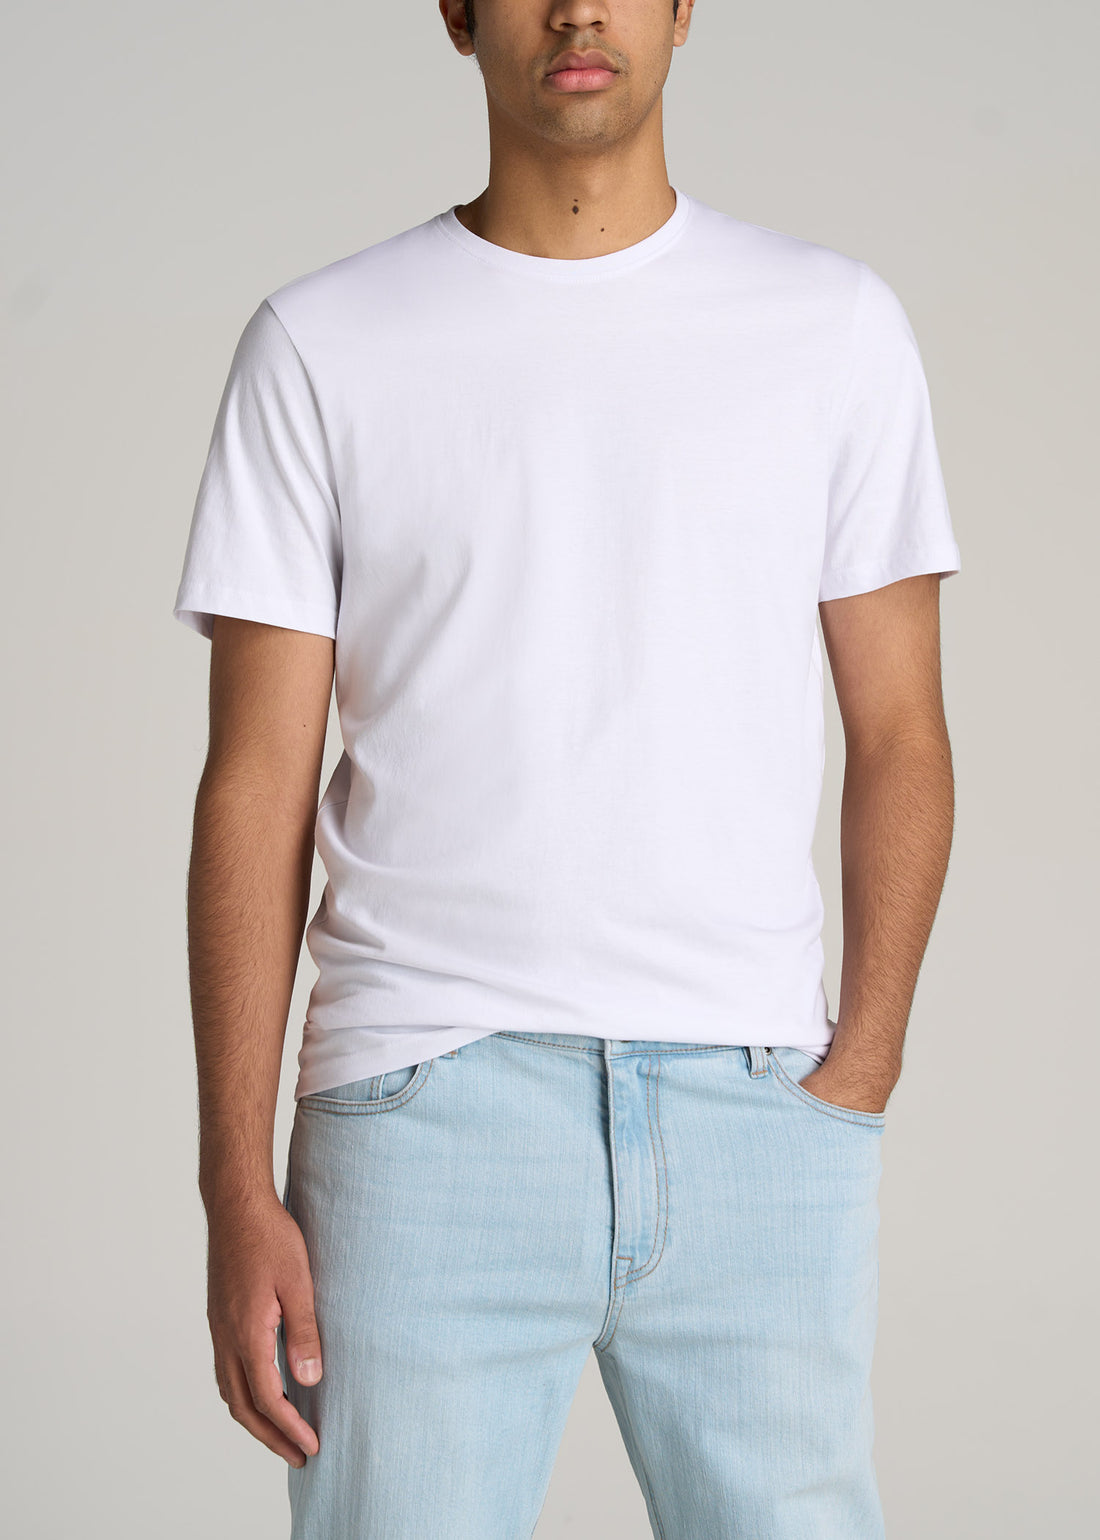 A tall man wearing a classic crewneck t-shirt in white.